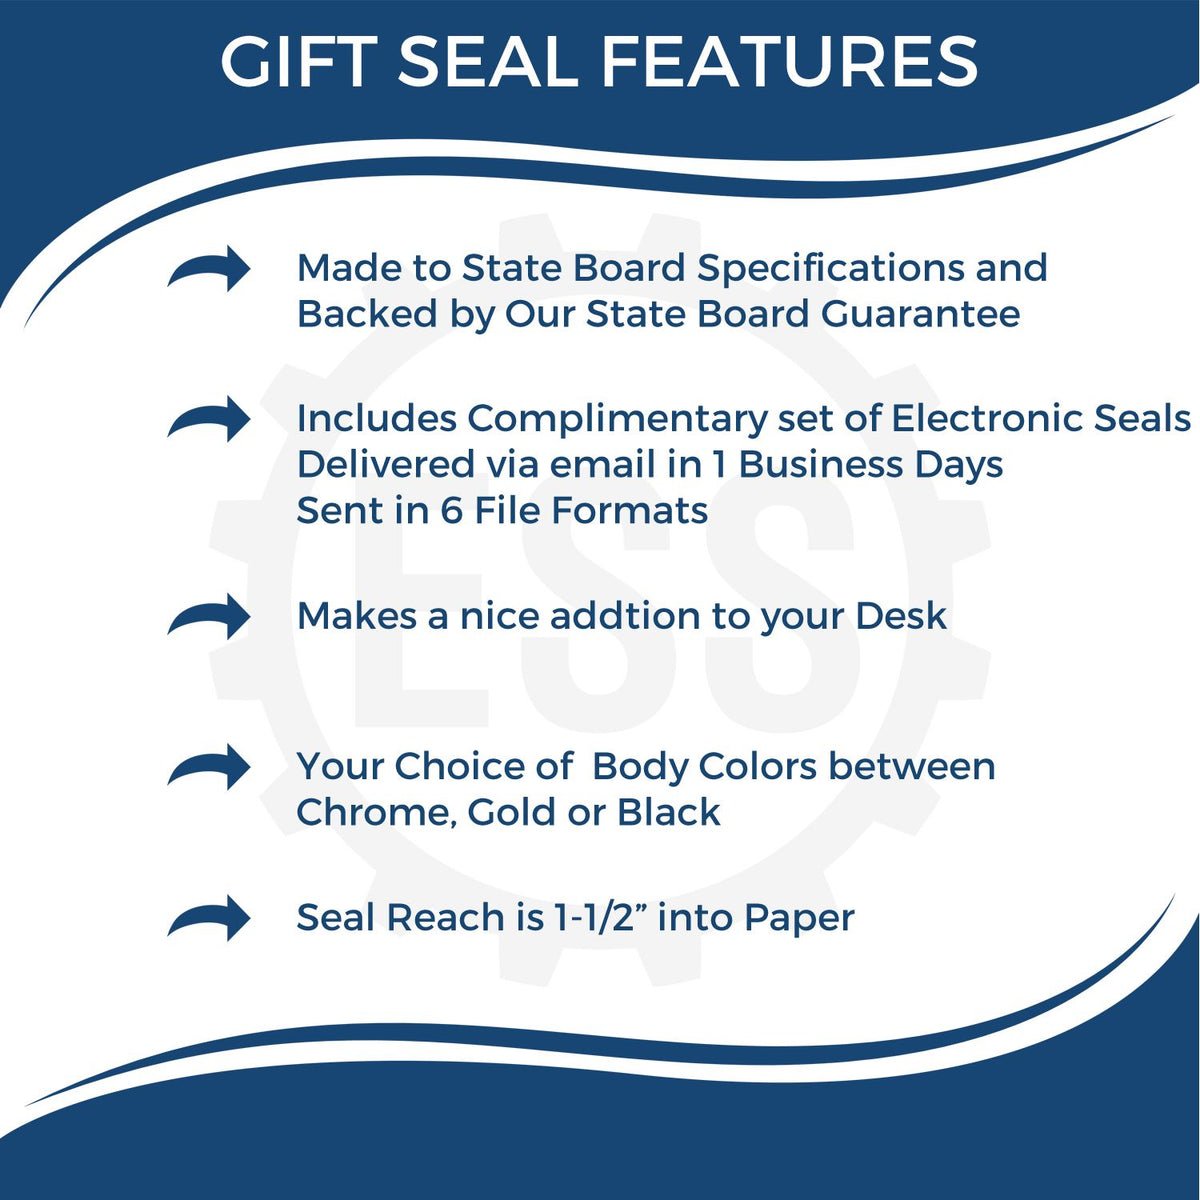 A picture of an infographic highlighting the selling points for the Gift Maine Land Surveyor Seal